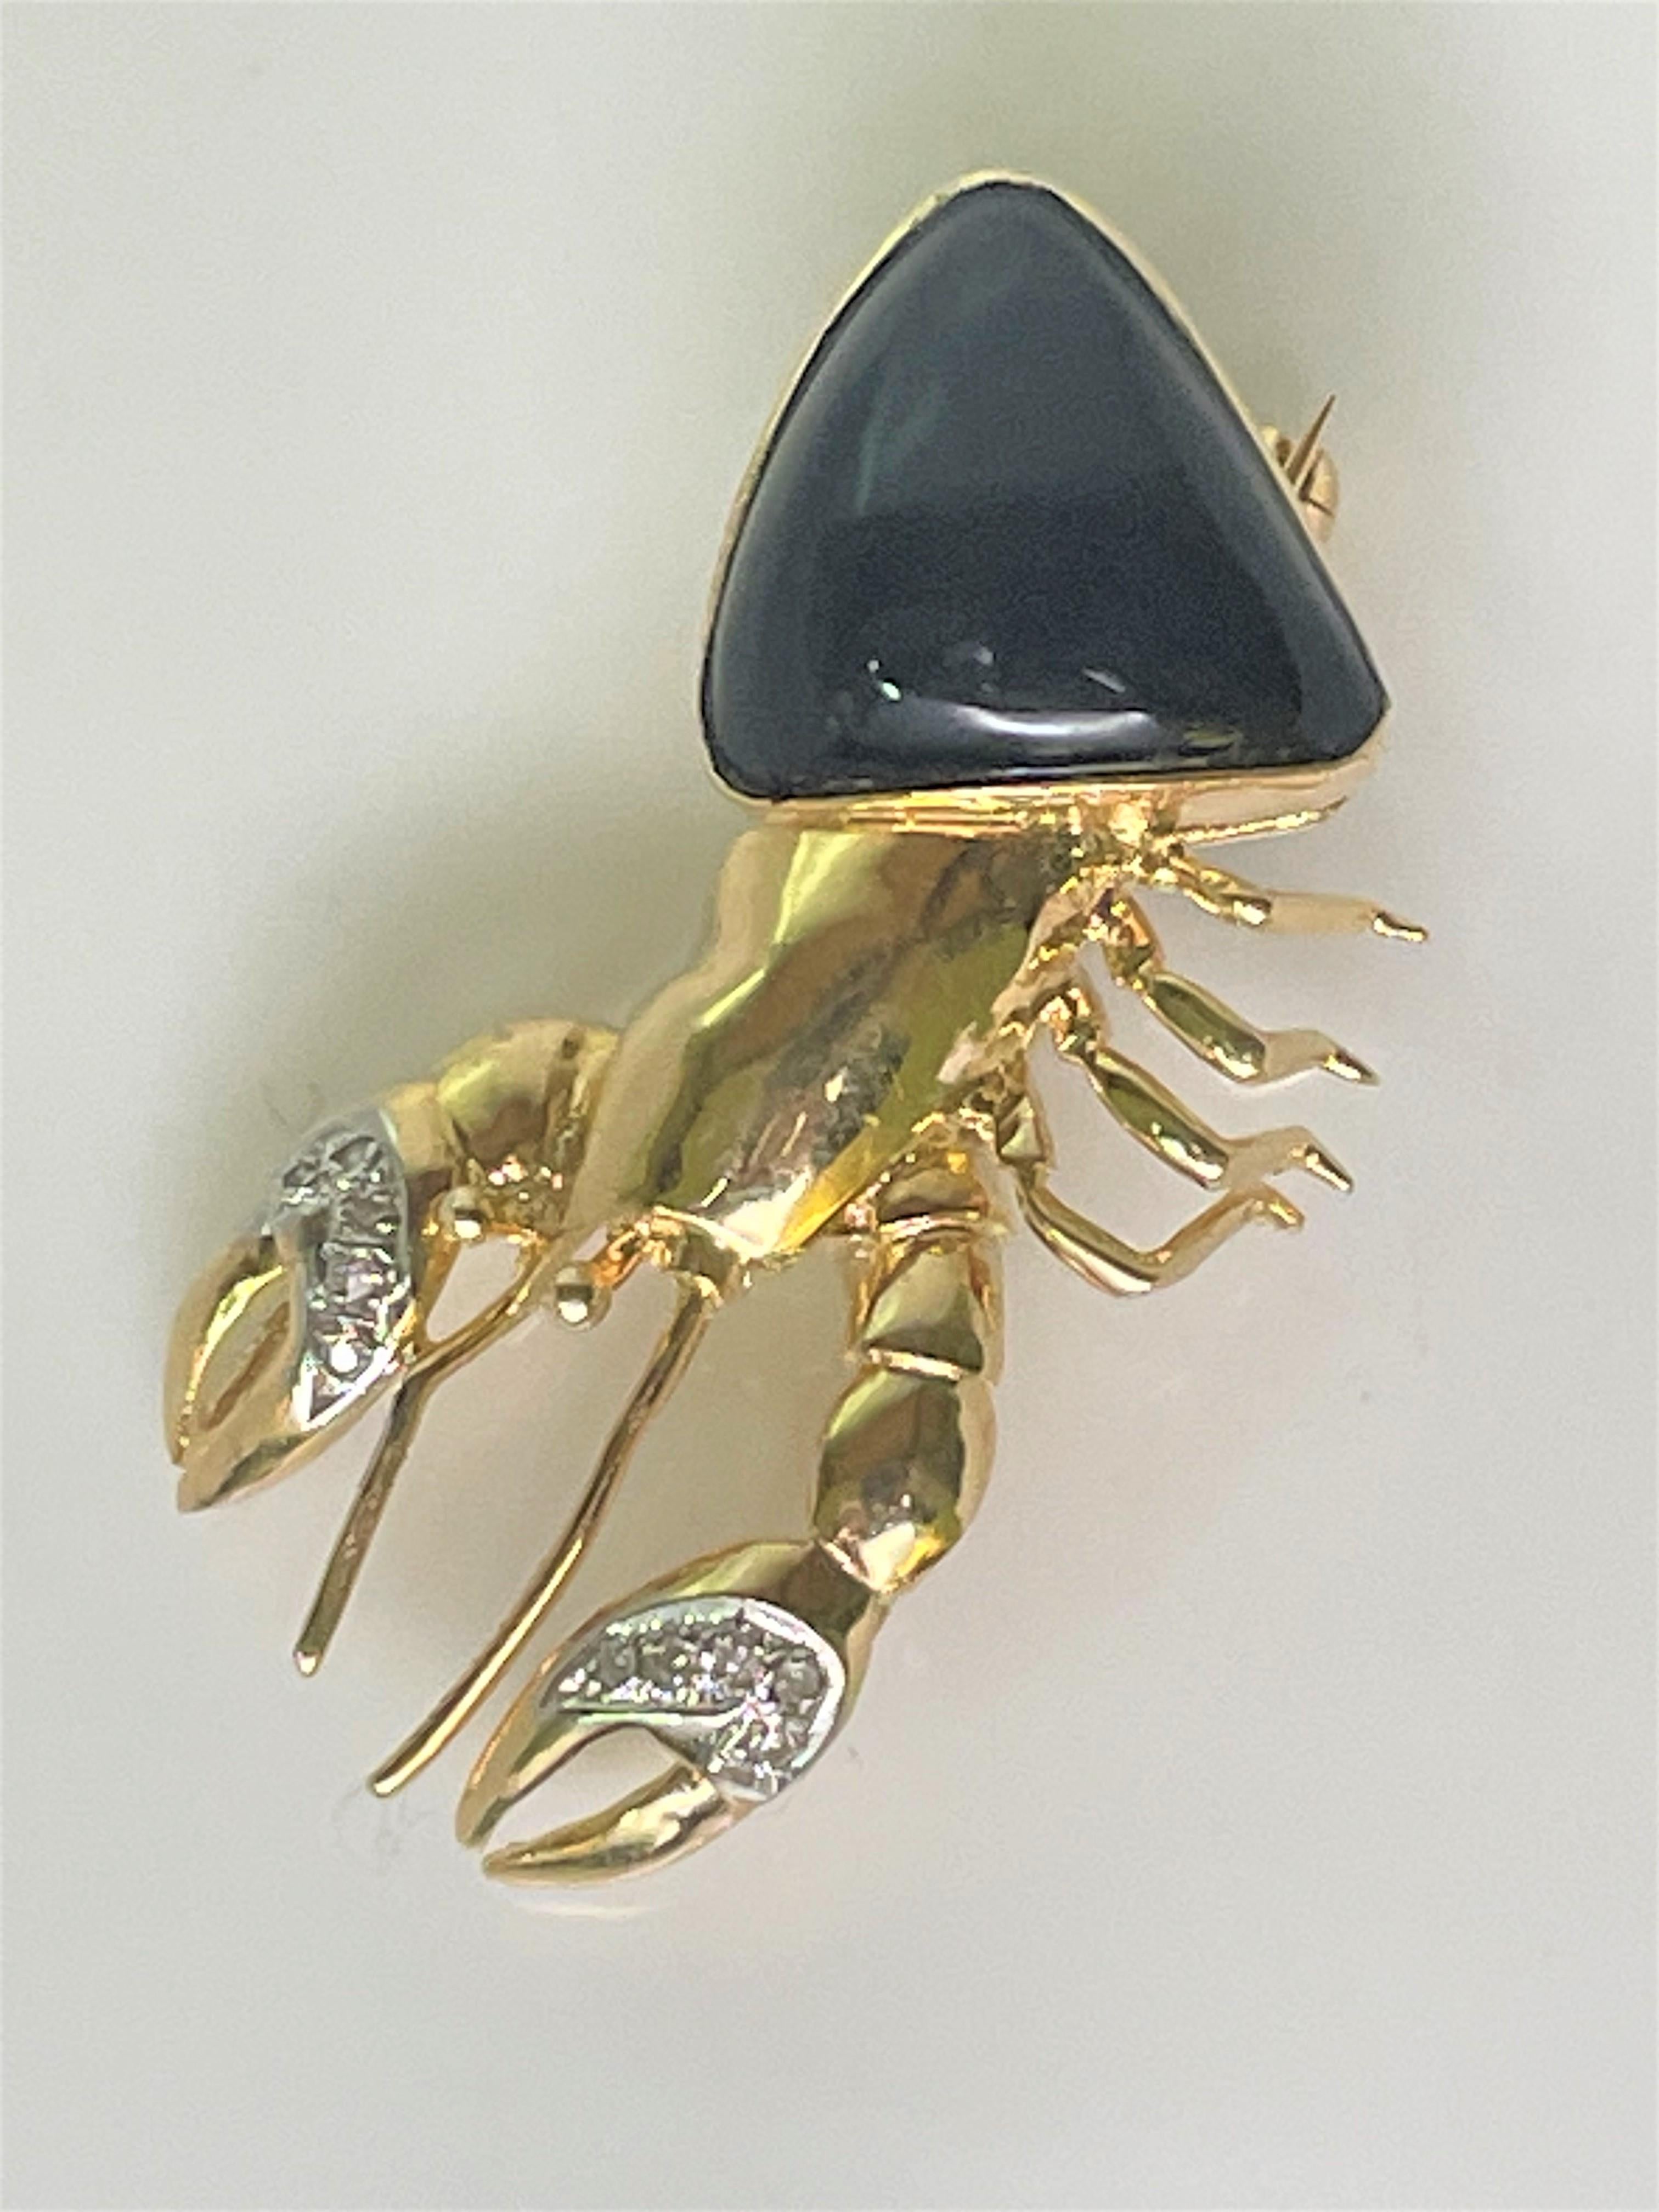 This adorable crab is sure to grab attention!
14 karat yellow gold crab.
Rounded triangle shape black onyx shell.
5 round diamonds adorn each claw.  Approximately .01ct each. 
Hinged pin with safety clasp.  Can also be worn as a pendant.
Crab only,